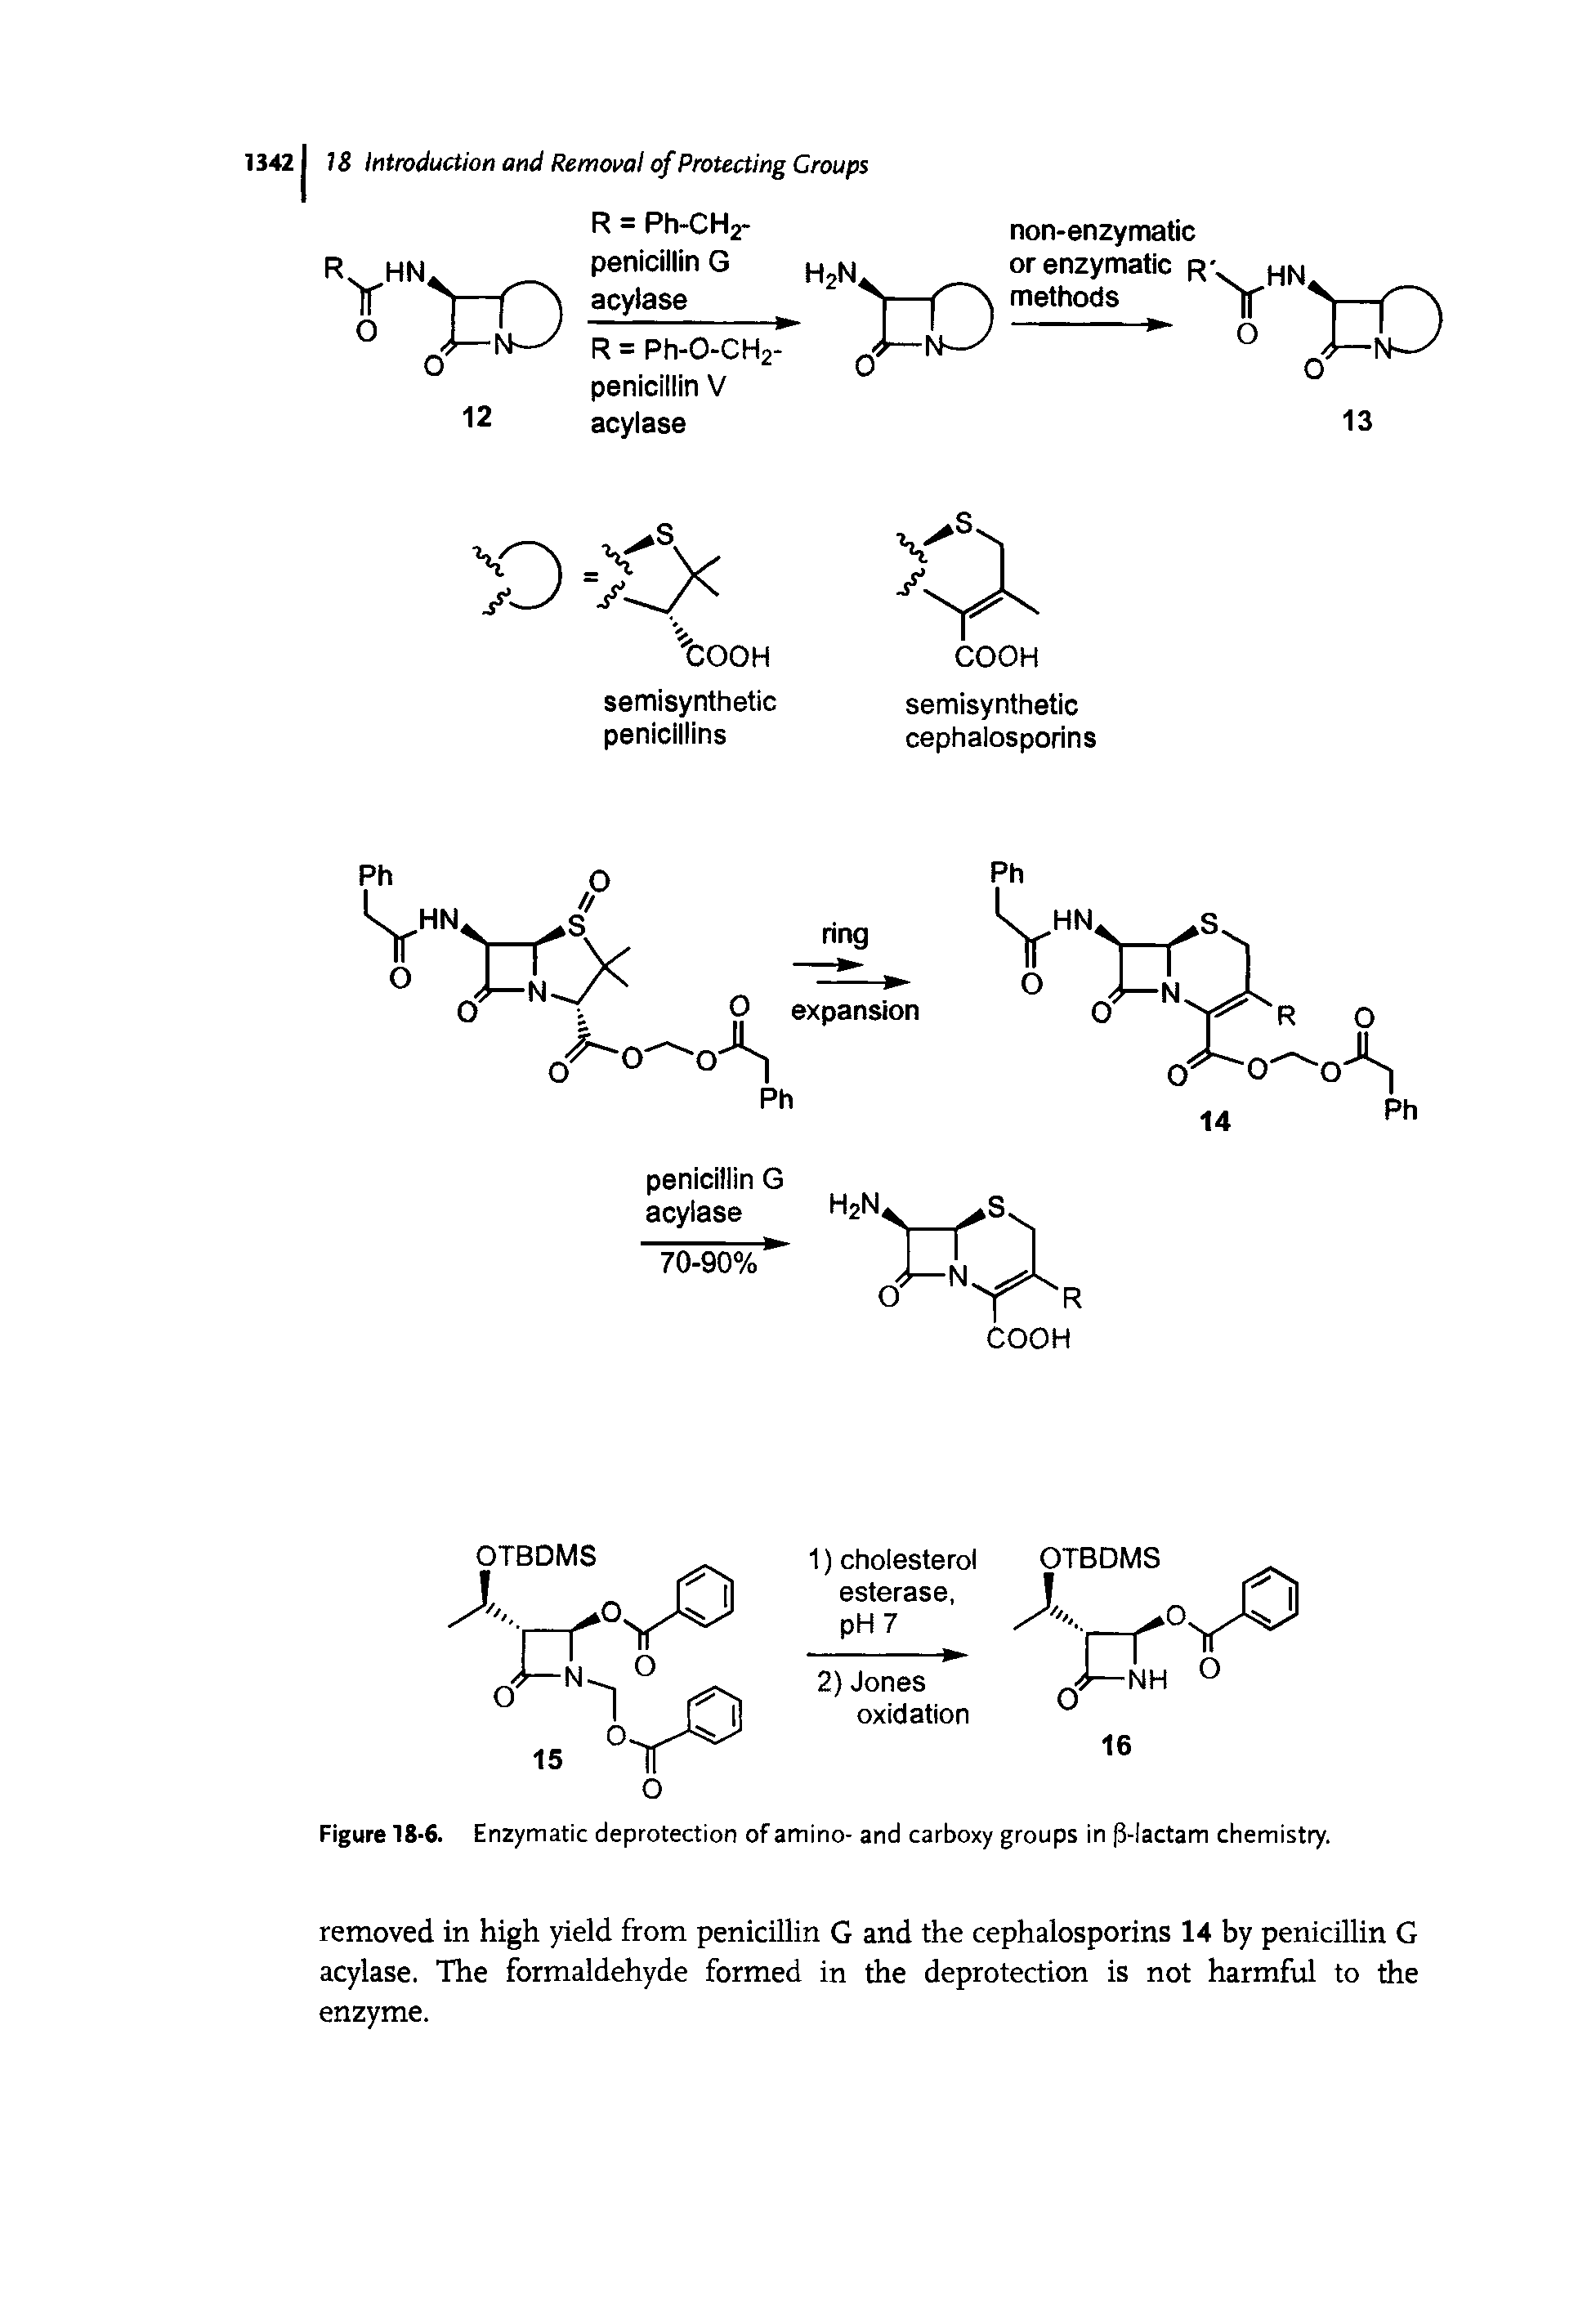 Figure 18-6. Enzymatic deprotection of amino- and carboxy groups in 3-lactam chemistry.